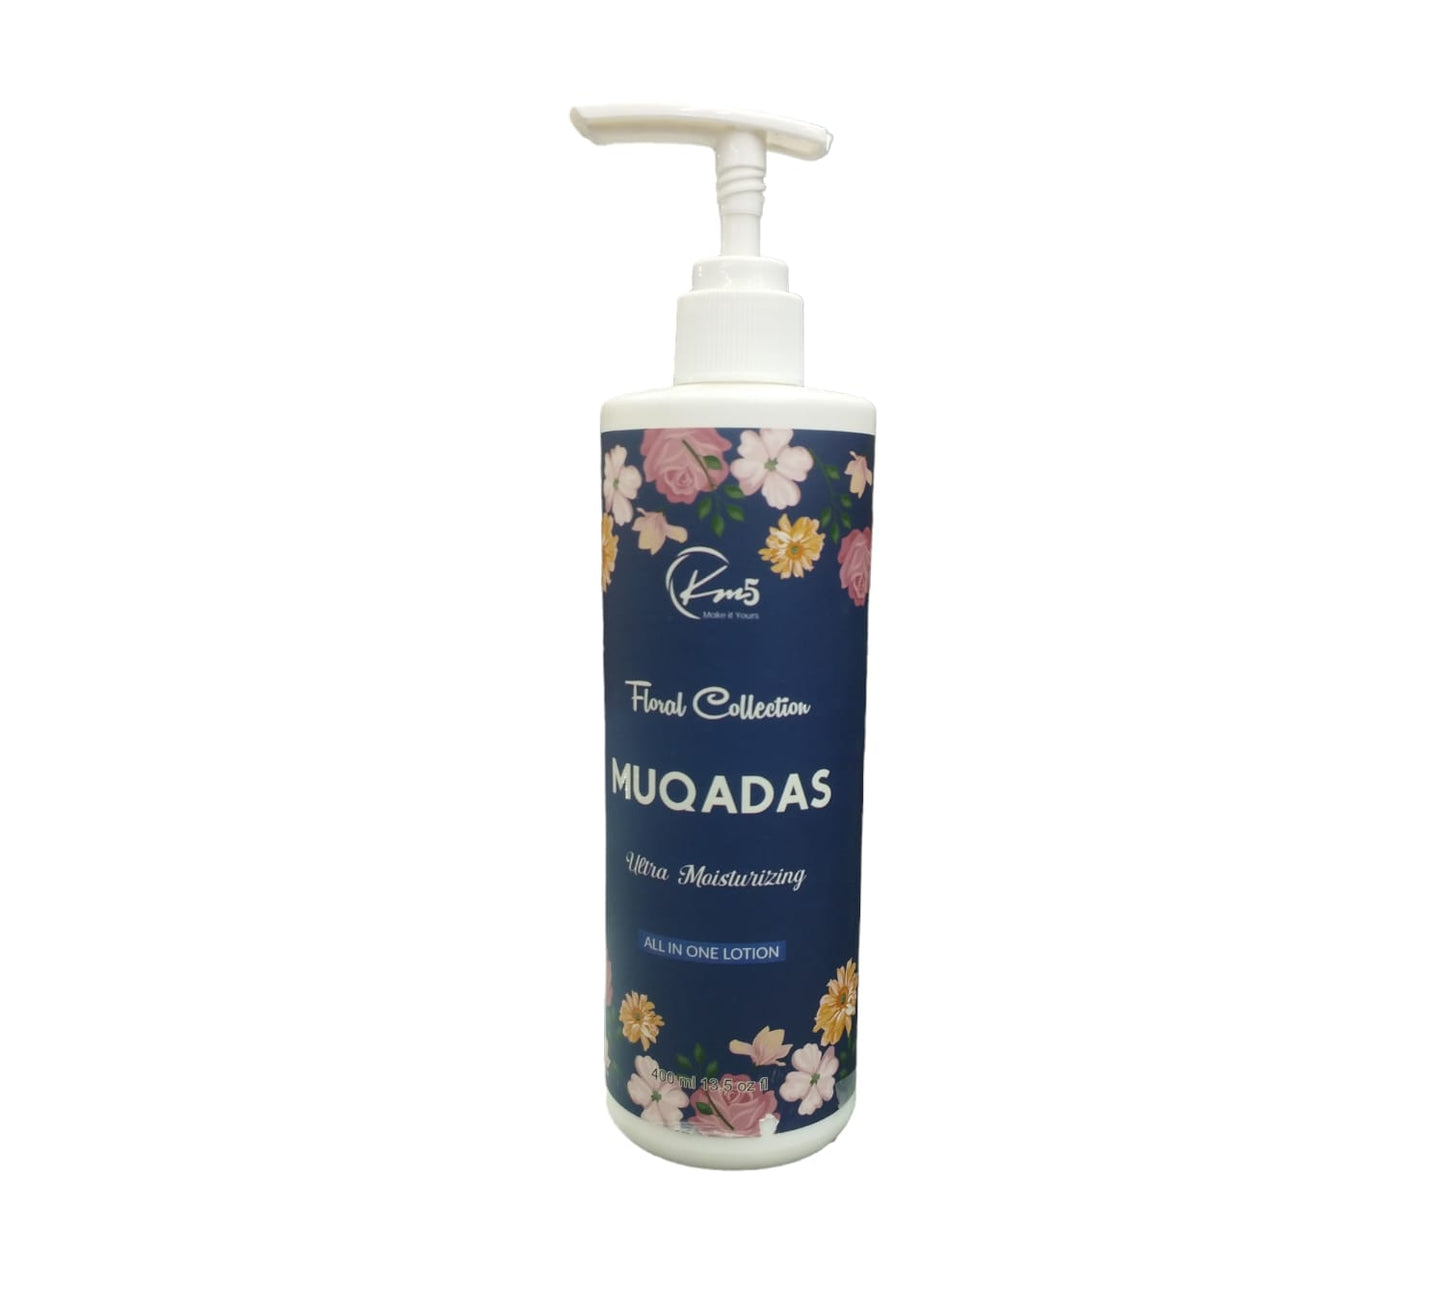 KM5 Floral Collection MUQADAS Ultra Moisturizing ALL IN ONE LOTION 400 mL: Embrace floral luxury for velvety-soft skin.